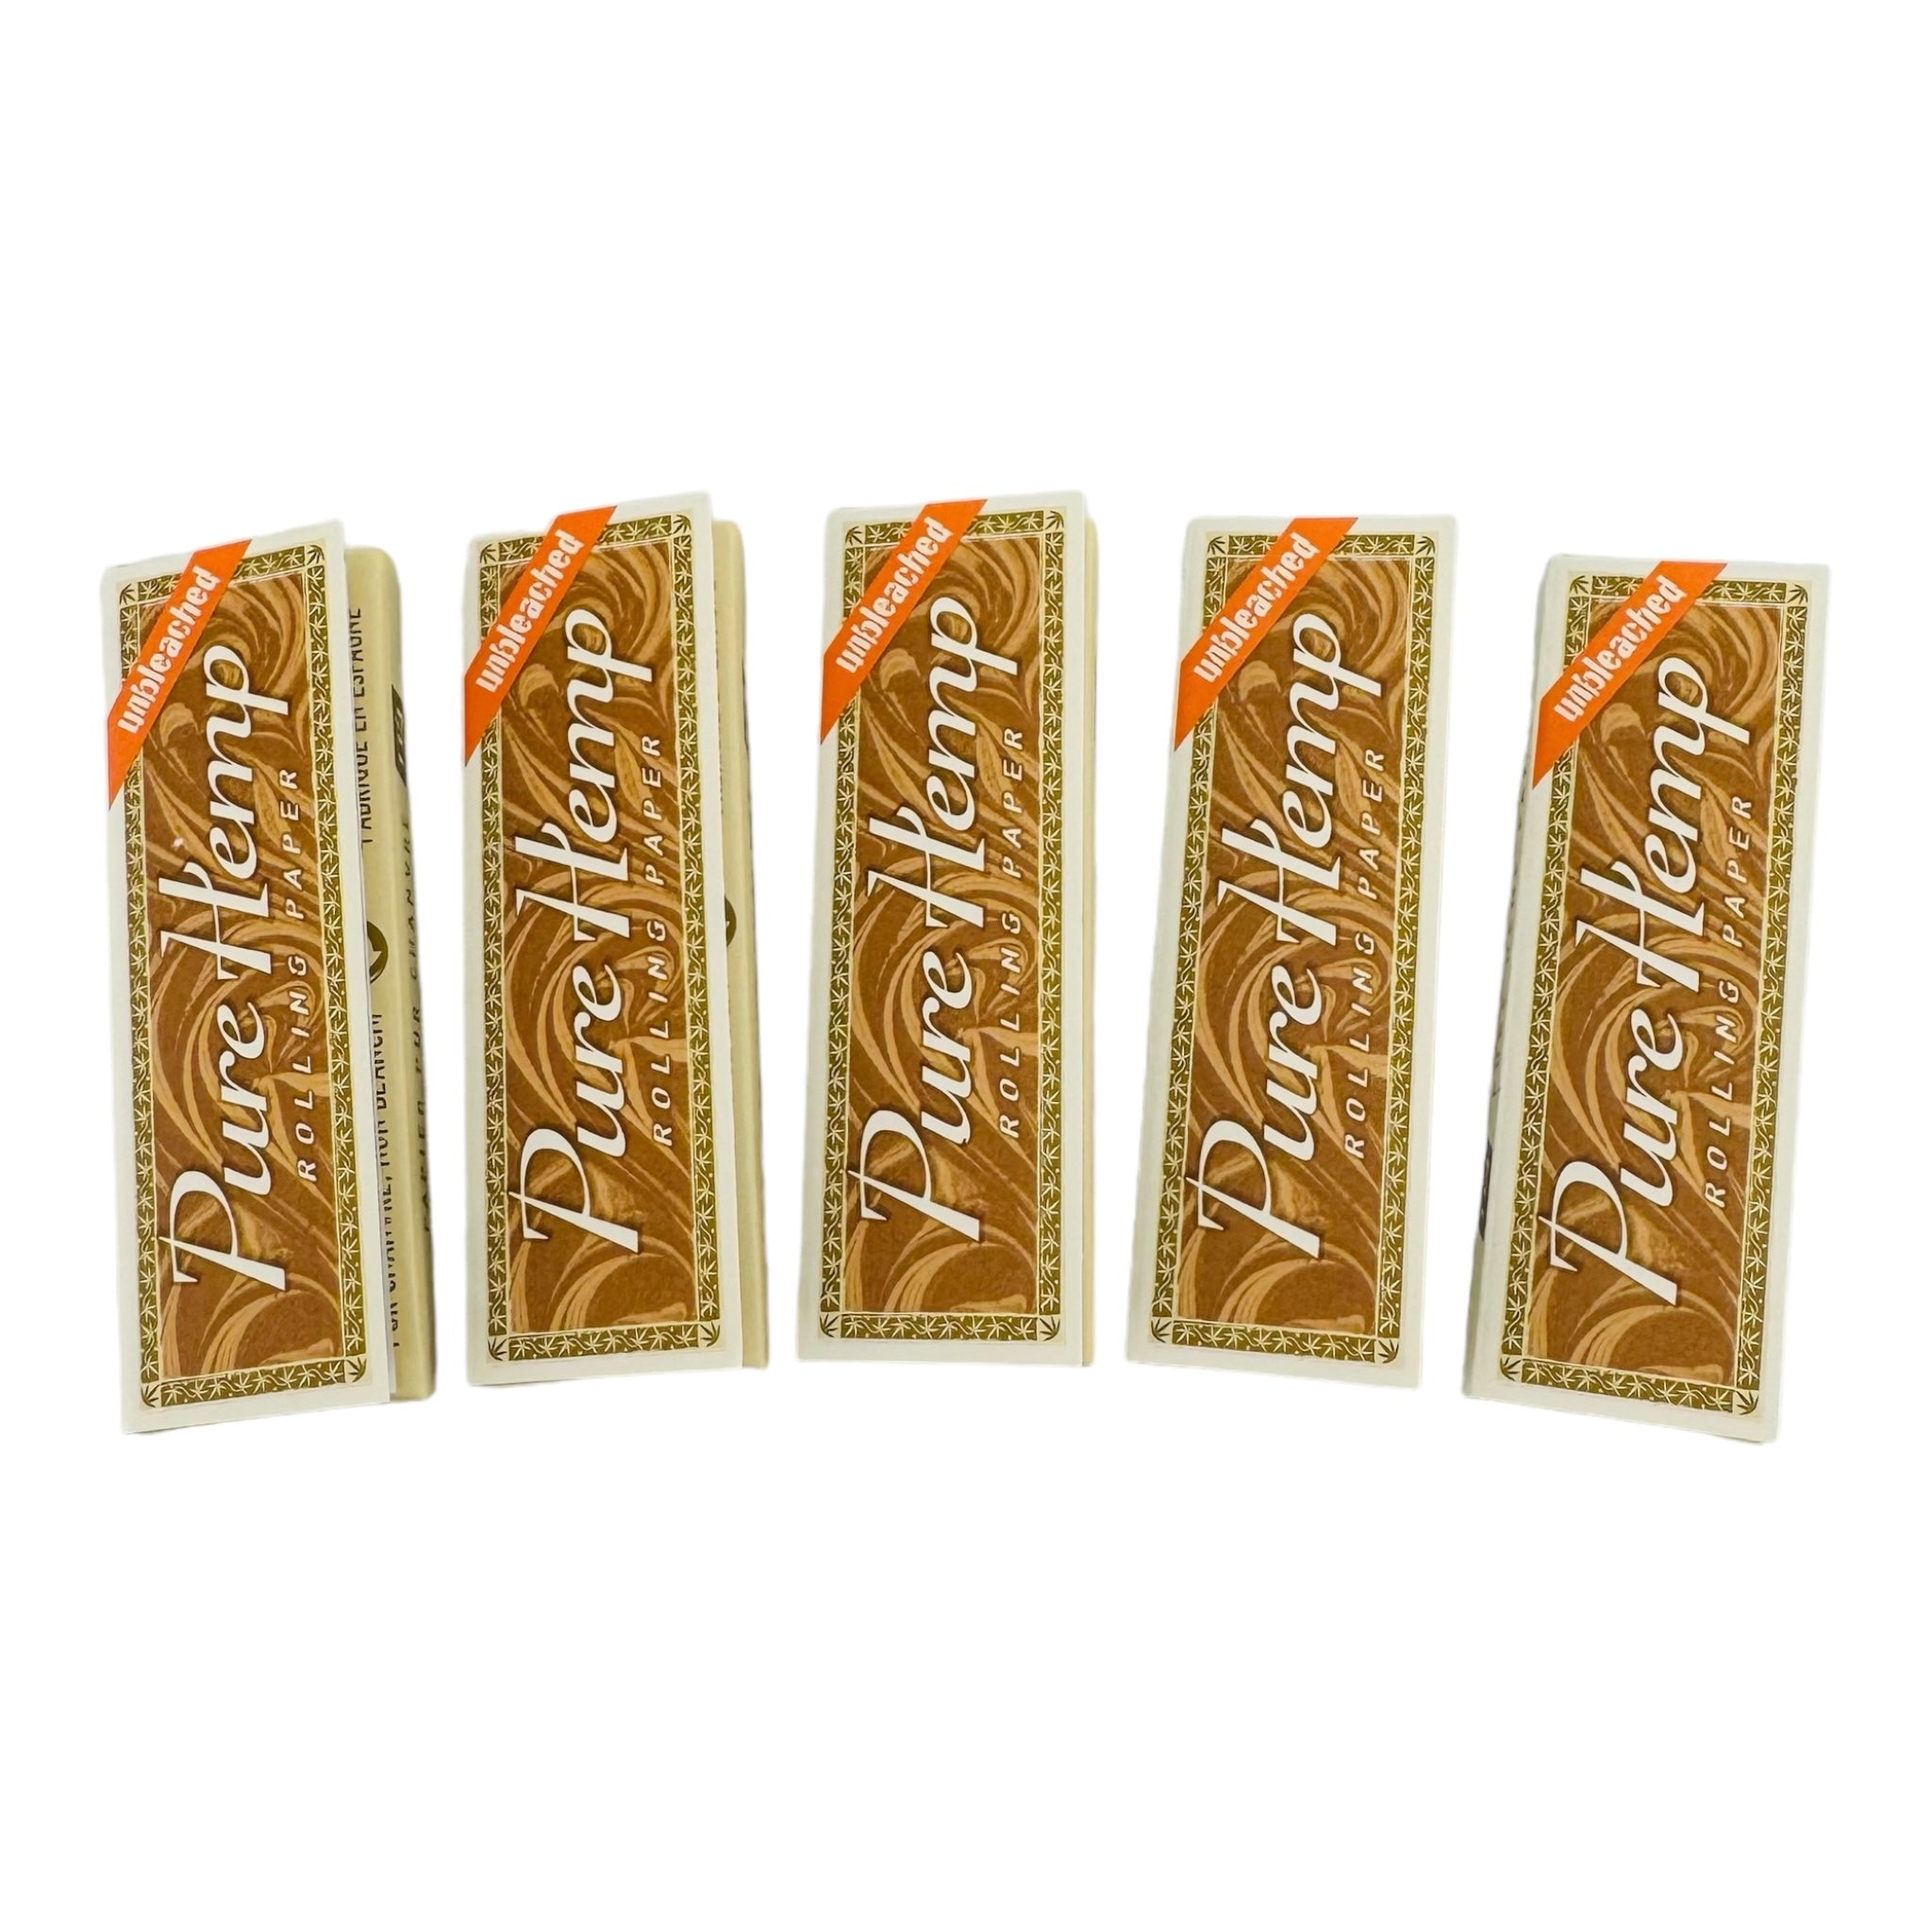 Pure Hemp Unbleached 1-1/4" Rolling Papers 5 individual Packs for sale